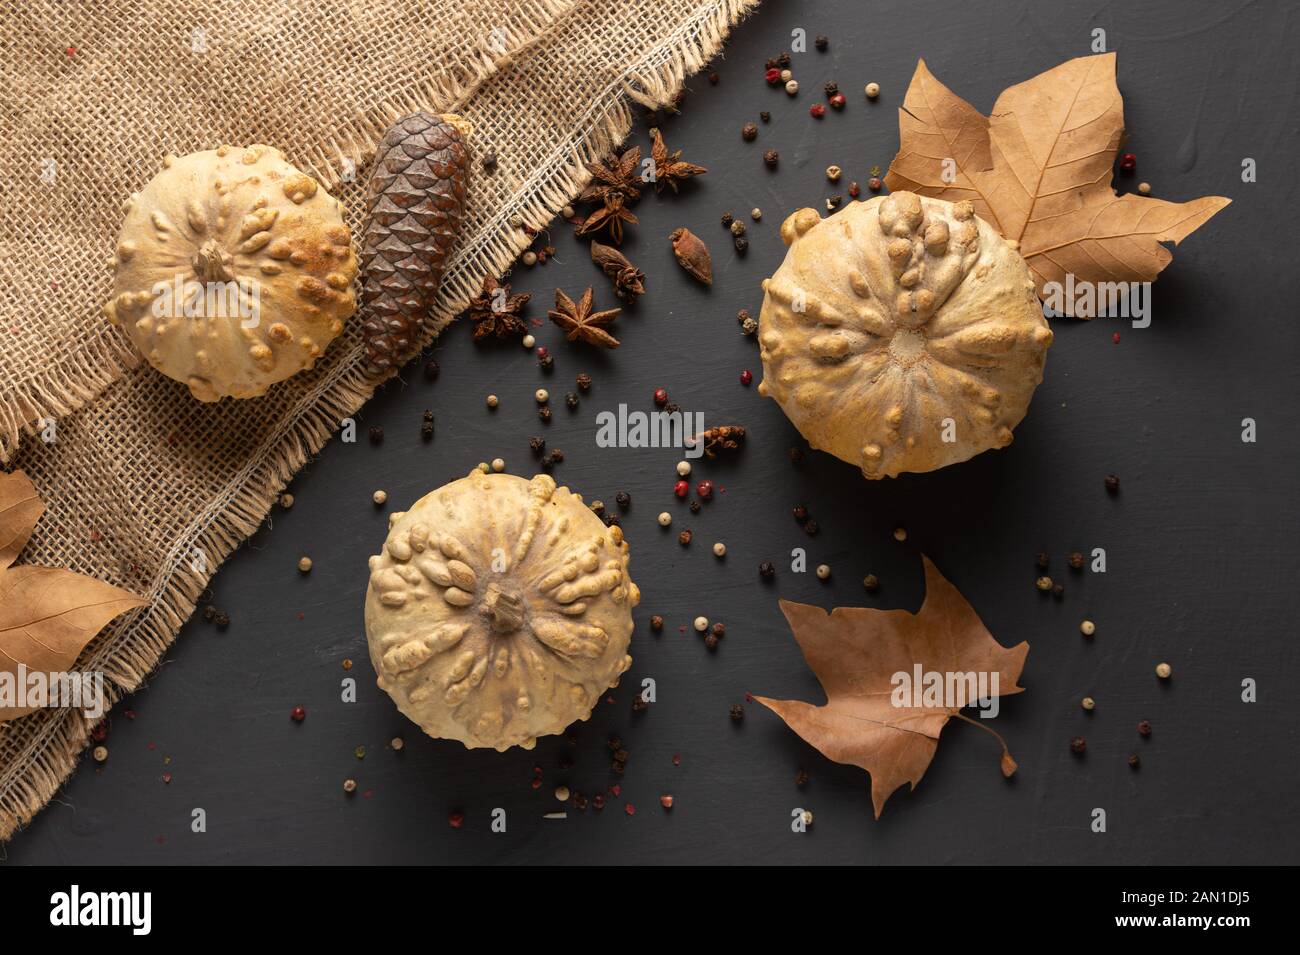 Autumn winter background with pumpkins, dried leaves, pineapple and whole pepper on rustic black background Stock Photo